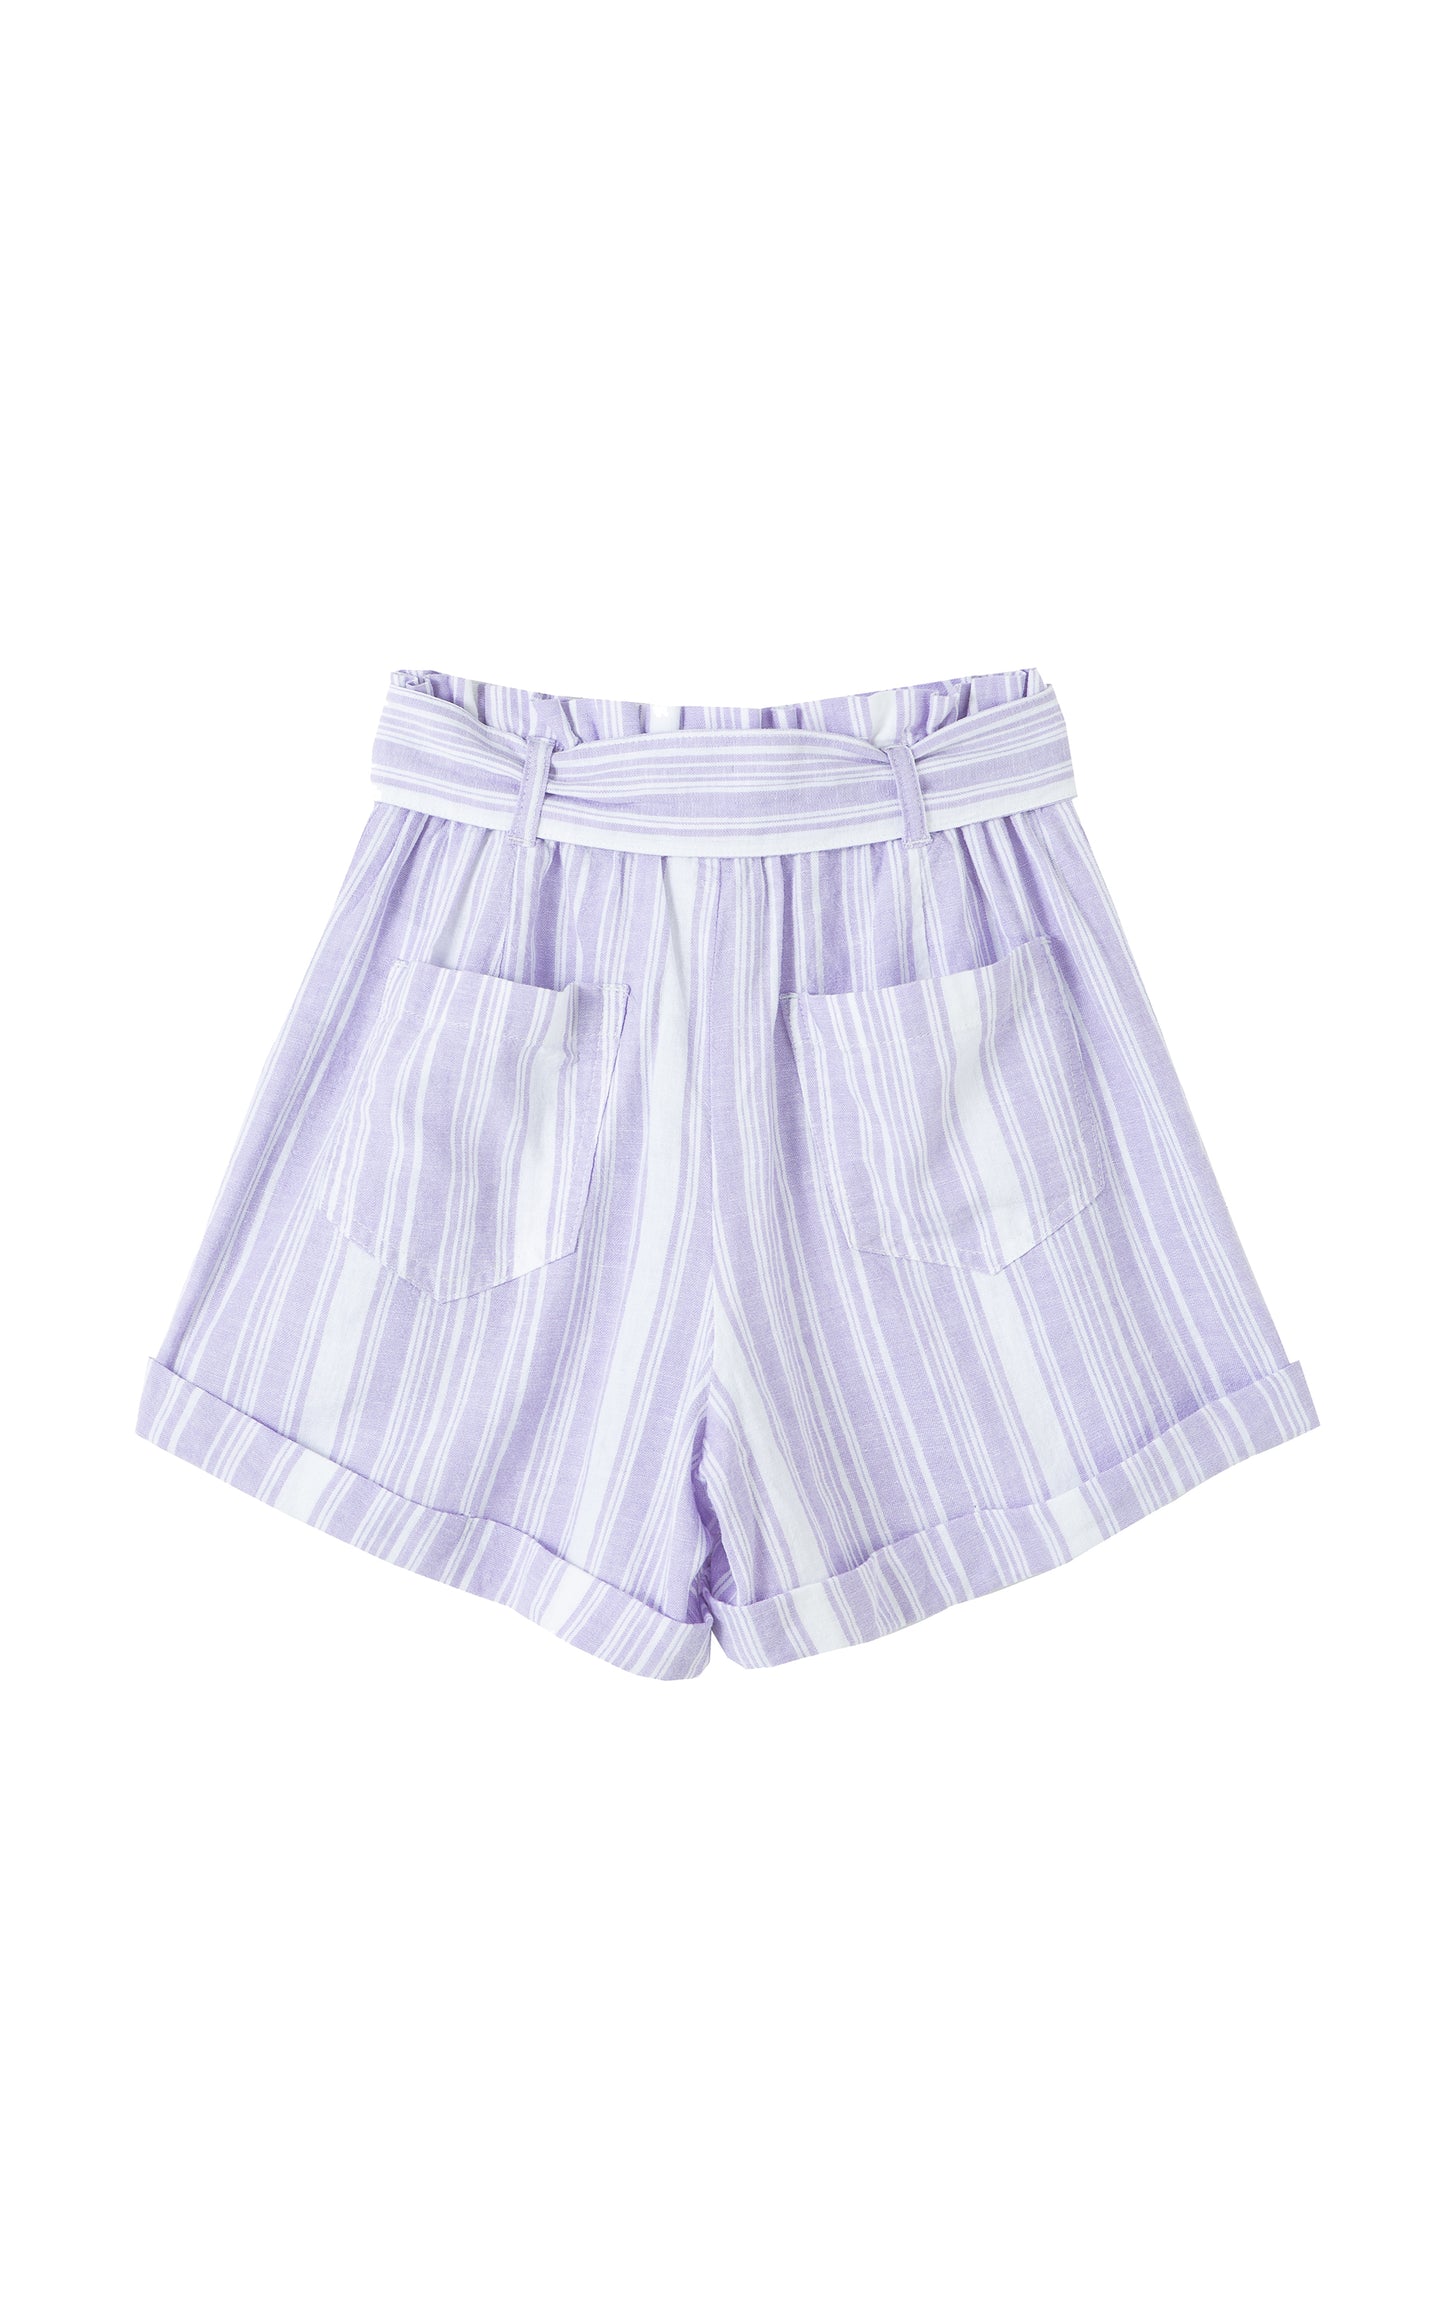 Back view of lilac paper bag shorts with white stripes 